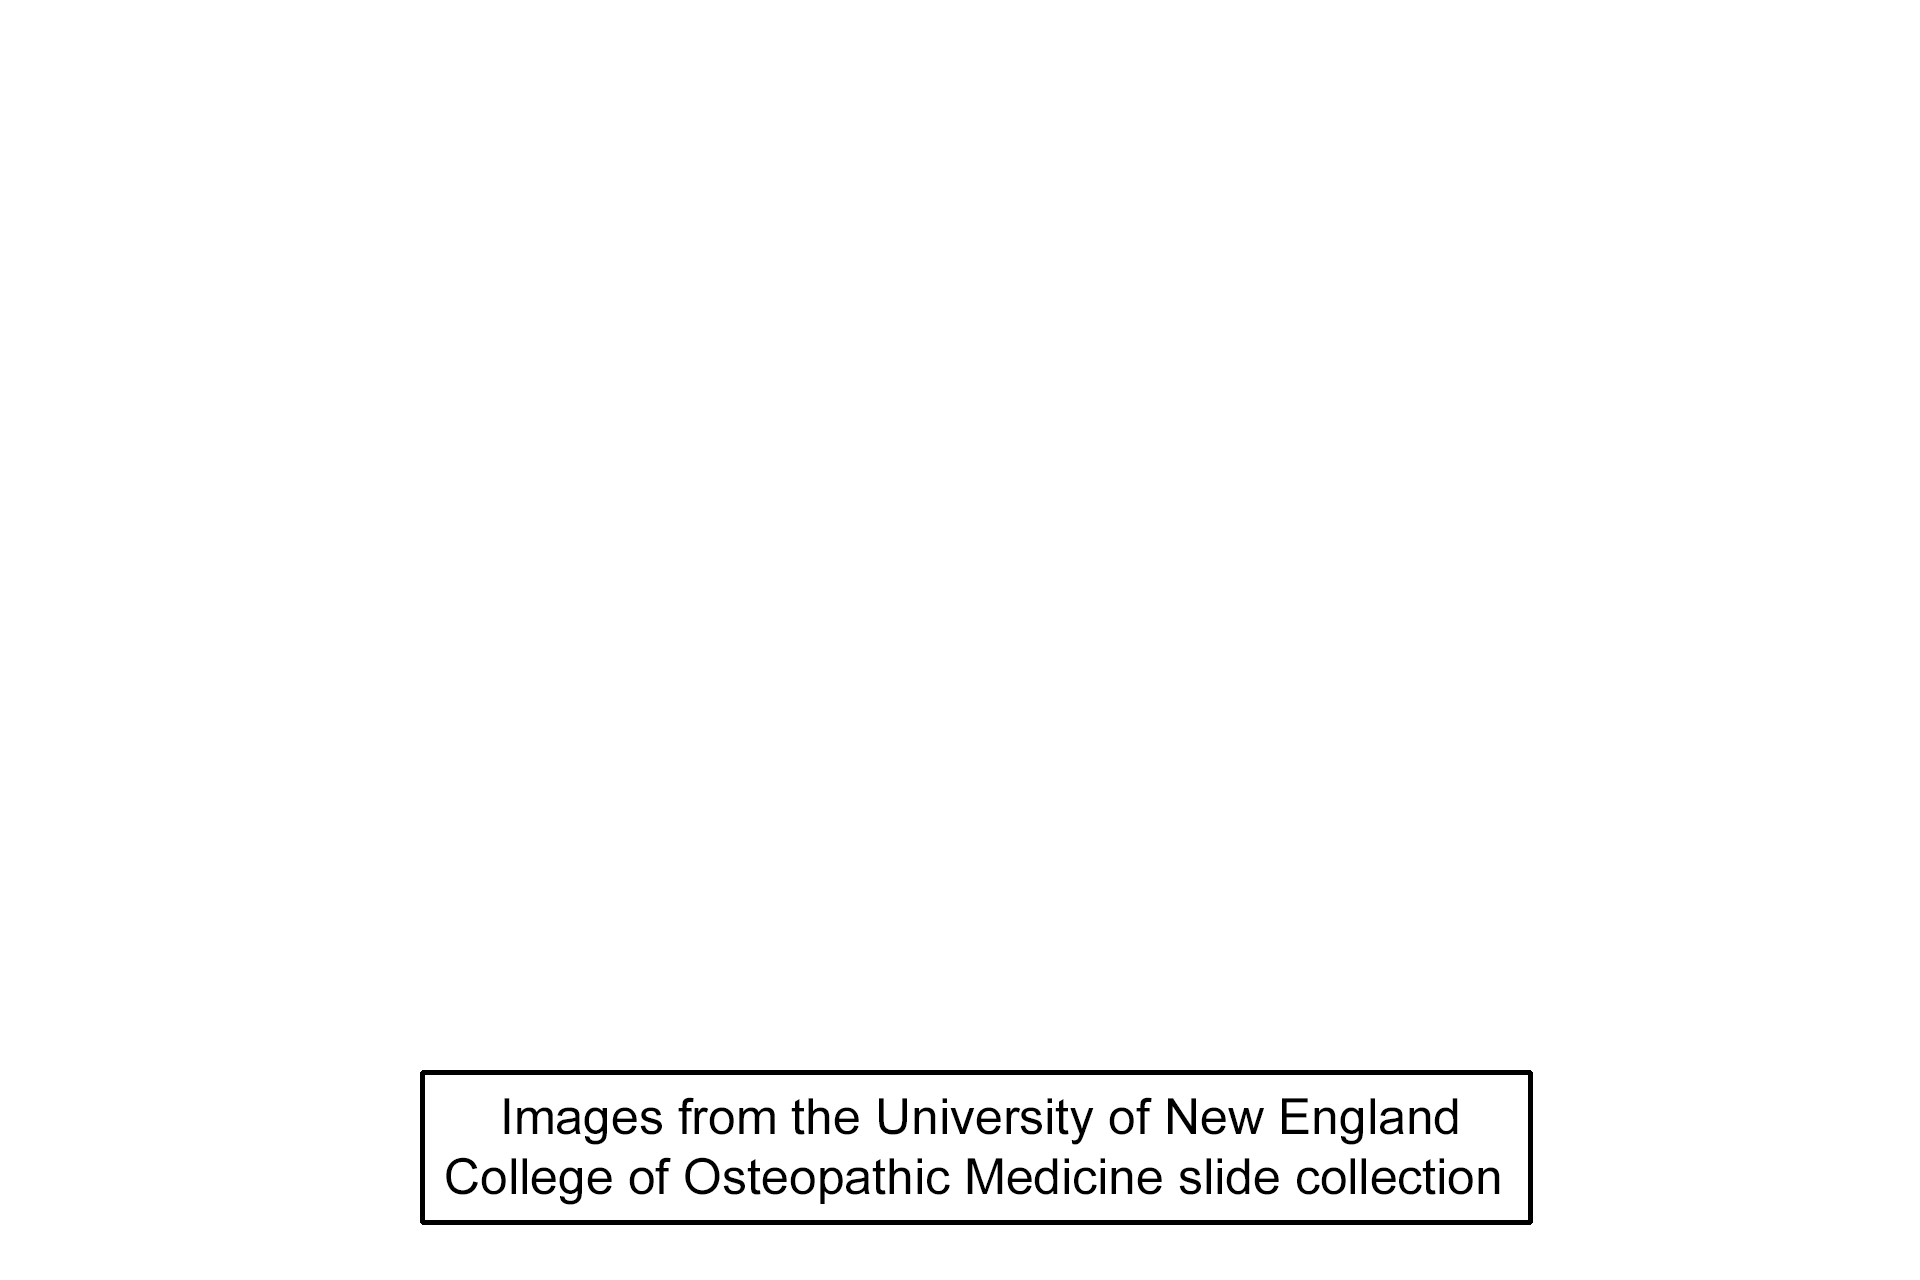 Image source > <p>Image take of a slide from the University of New England College of Osteopathic Medicine slide collection.</p>
